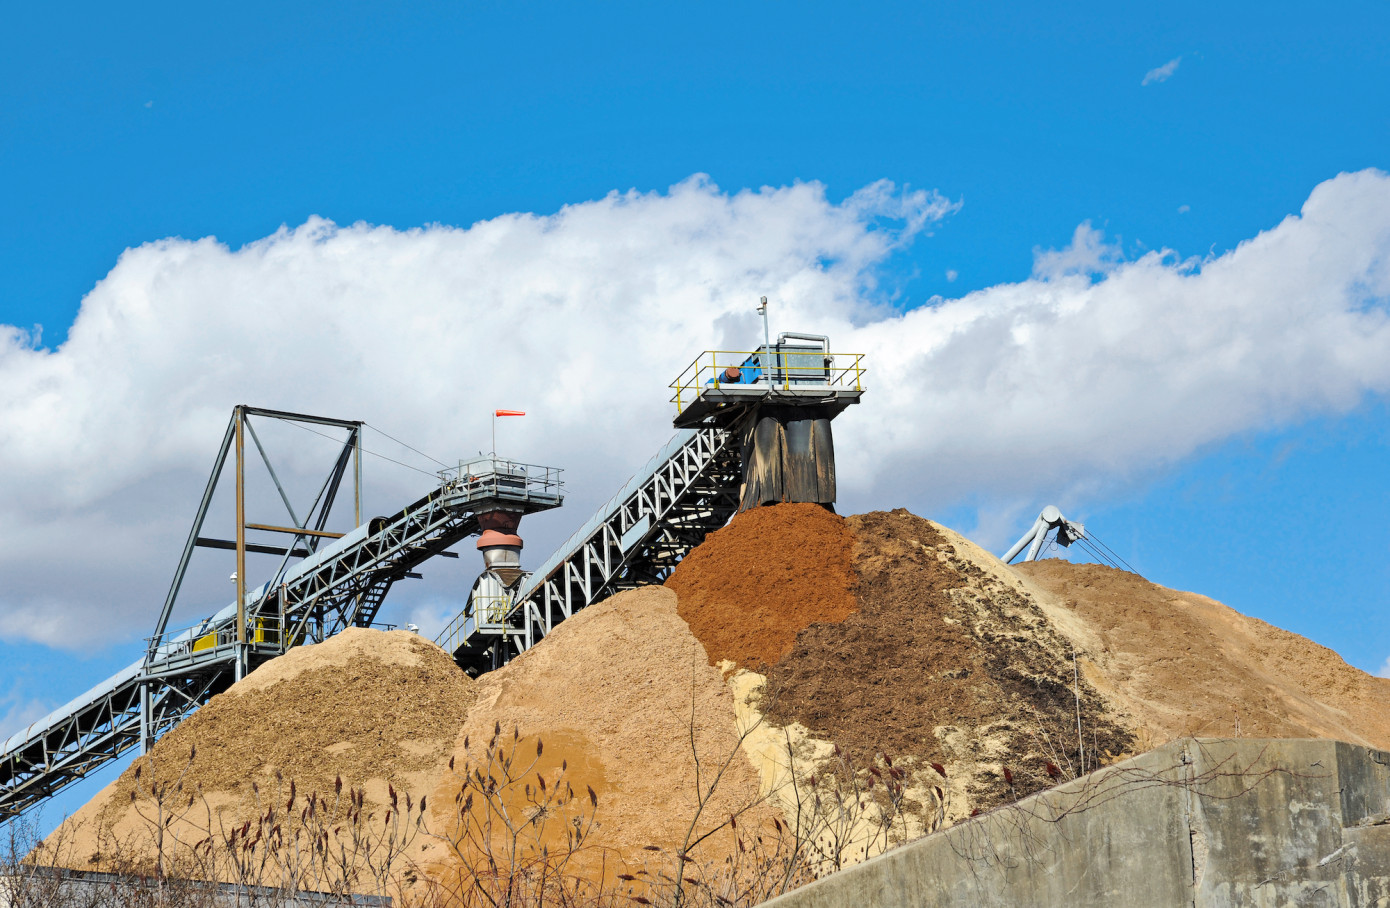 In March, price for wood chips exported from Australia to China slips 2%